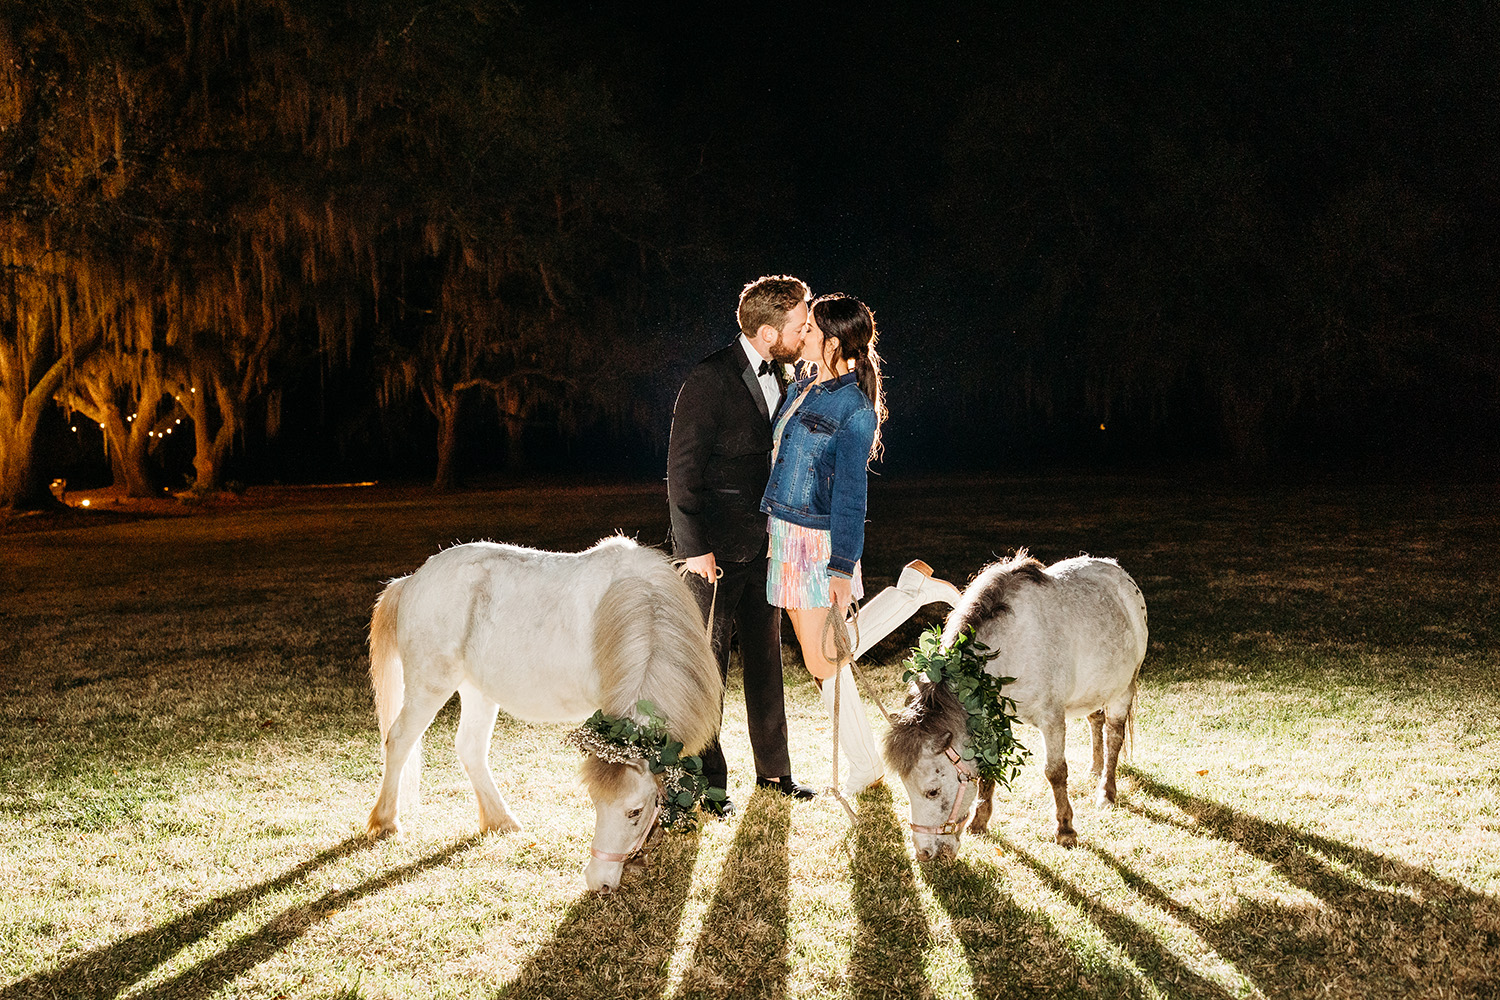 Bride and groom kissing while holding mini horses.